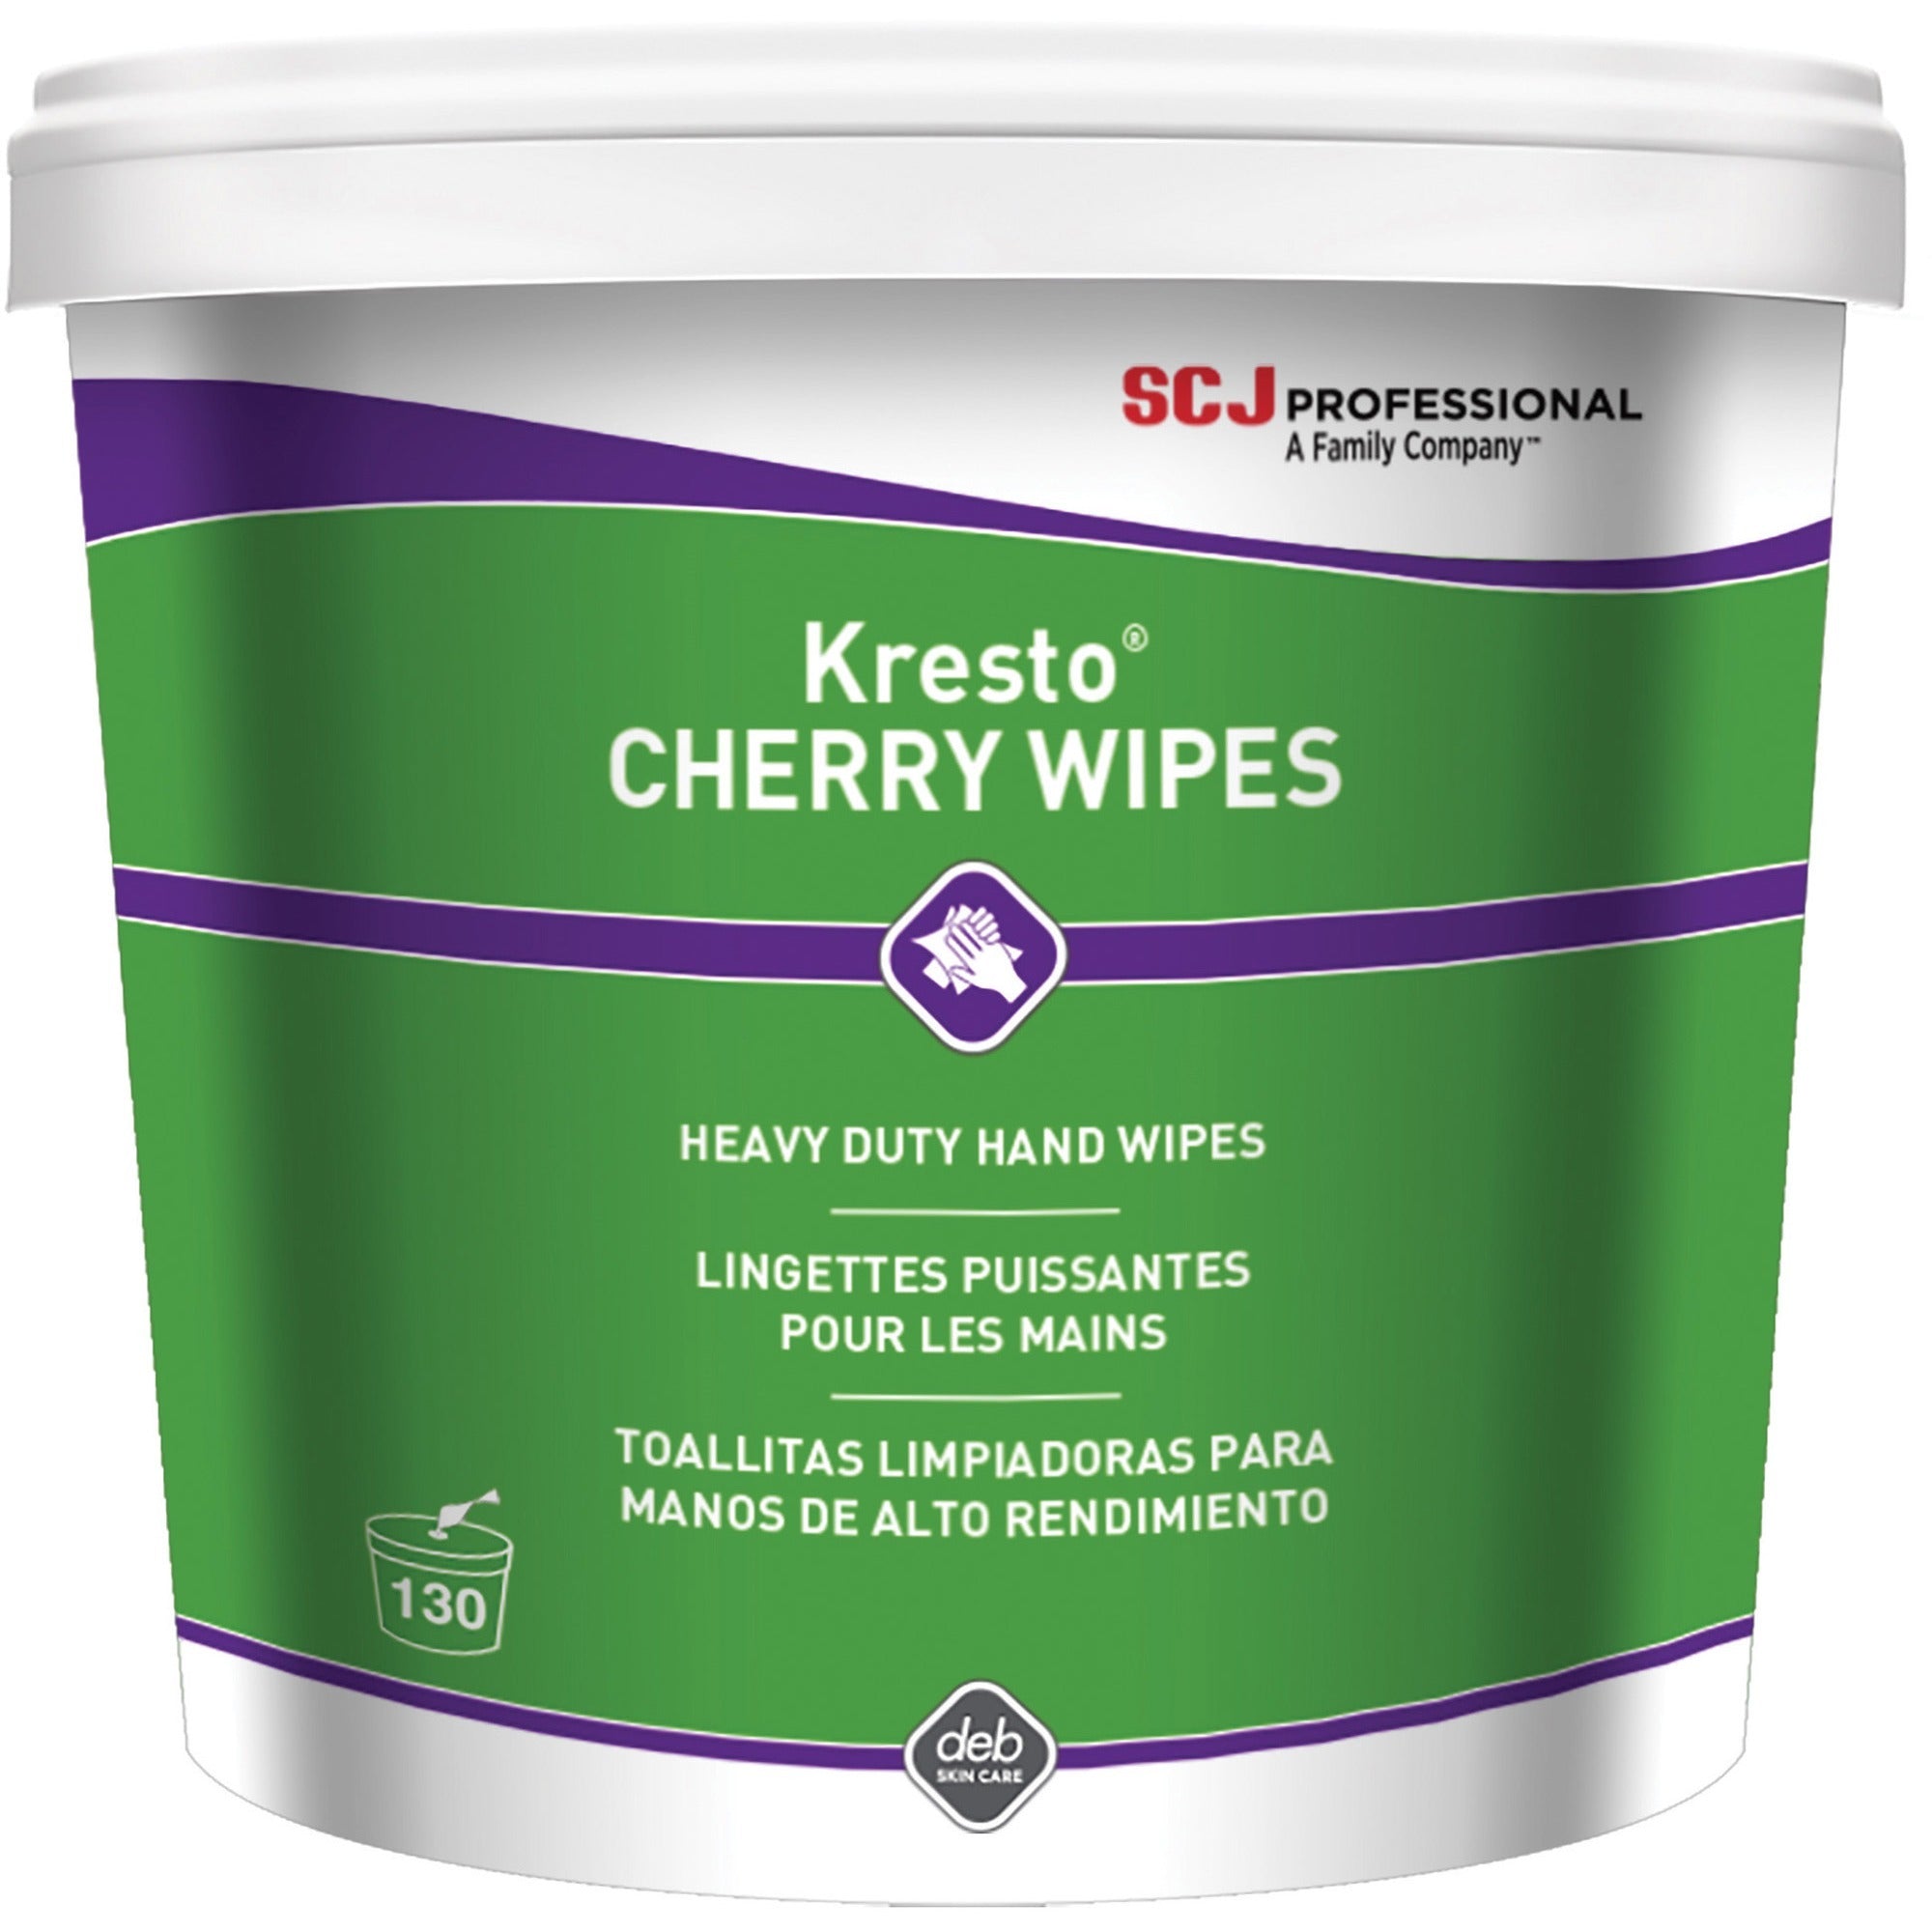 sc-johnson-kresto-heavy-duty-xl-hand-wipes-cherry-10-x-12-white-red-polypropylene-moisturizing-non-toxic-easy-to-use-absorbent-silicone-free-heavy-duty-for-hand-skin-130-per-canister-1-each_sjnkcw130w - 1